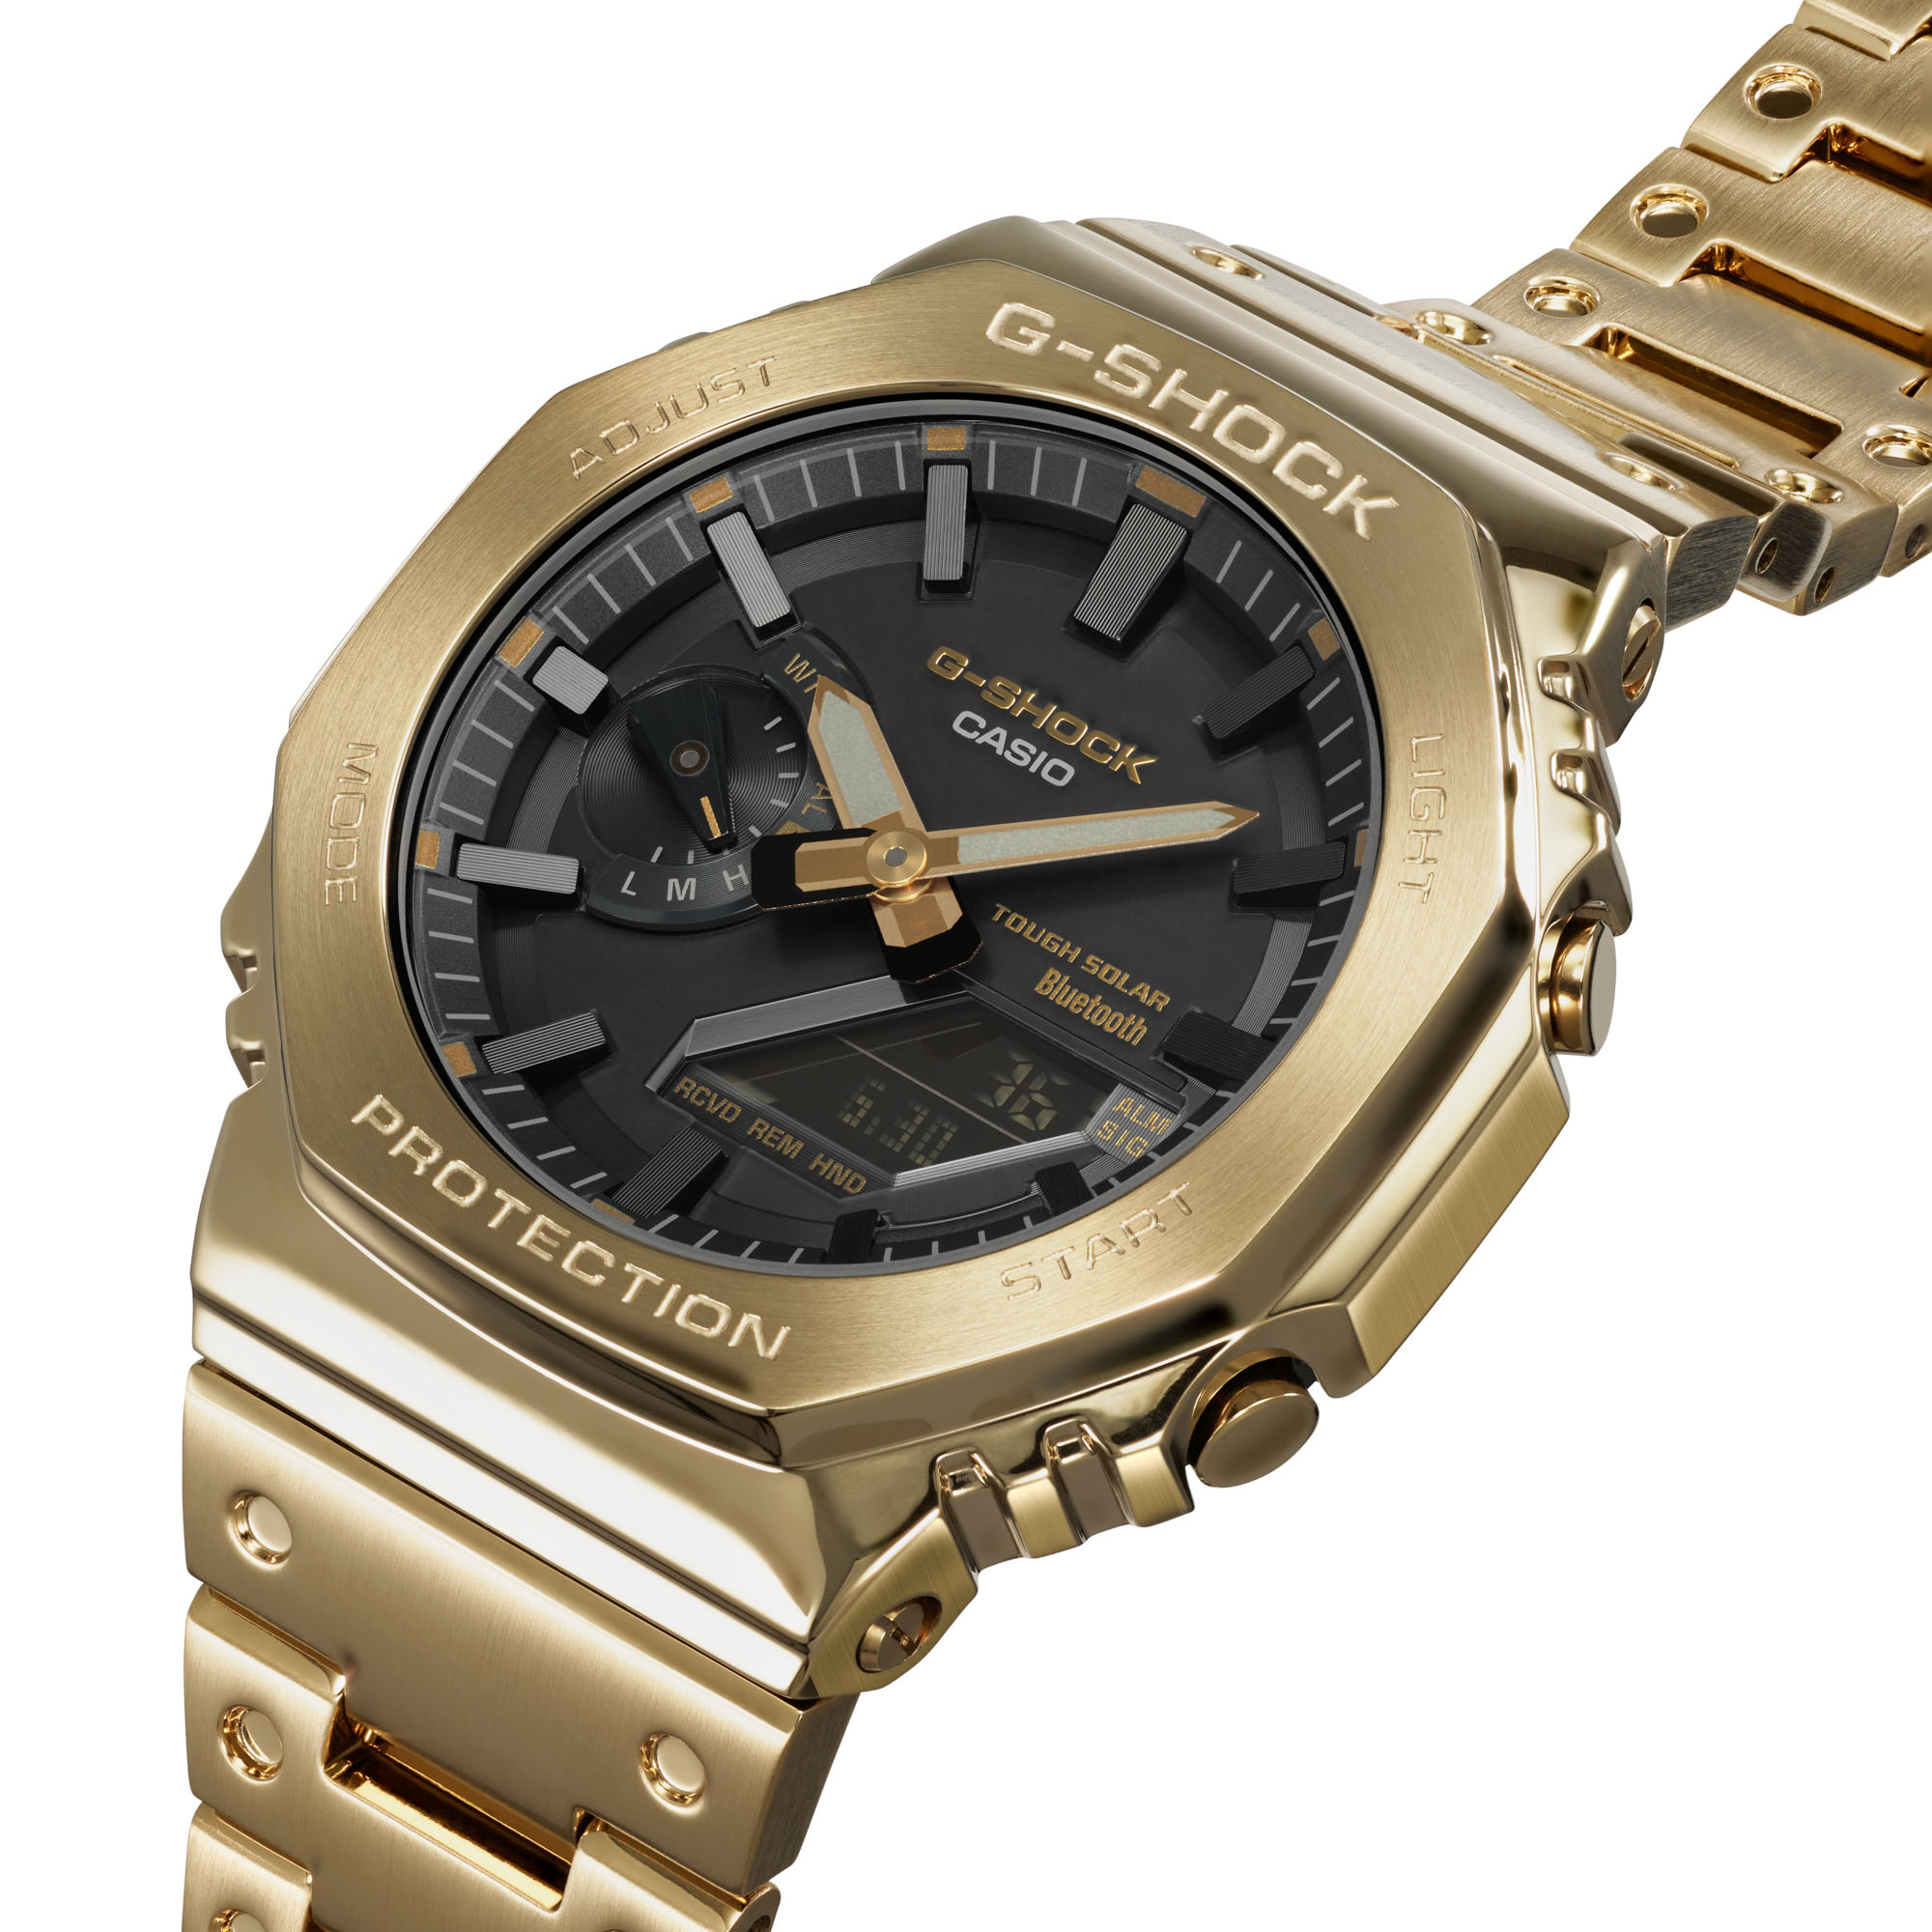 First Look: G-Shock Expands Its All-Gold Line With The GMB2100GD